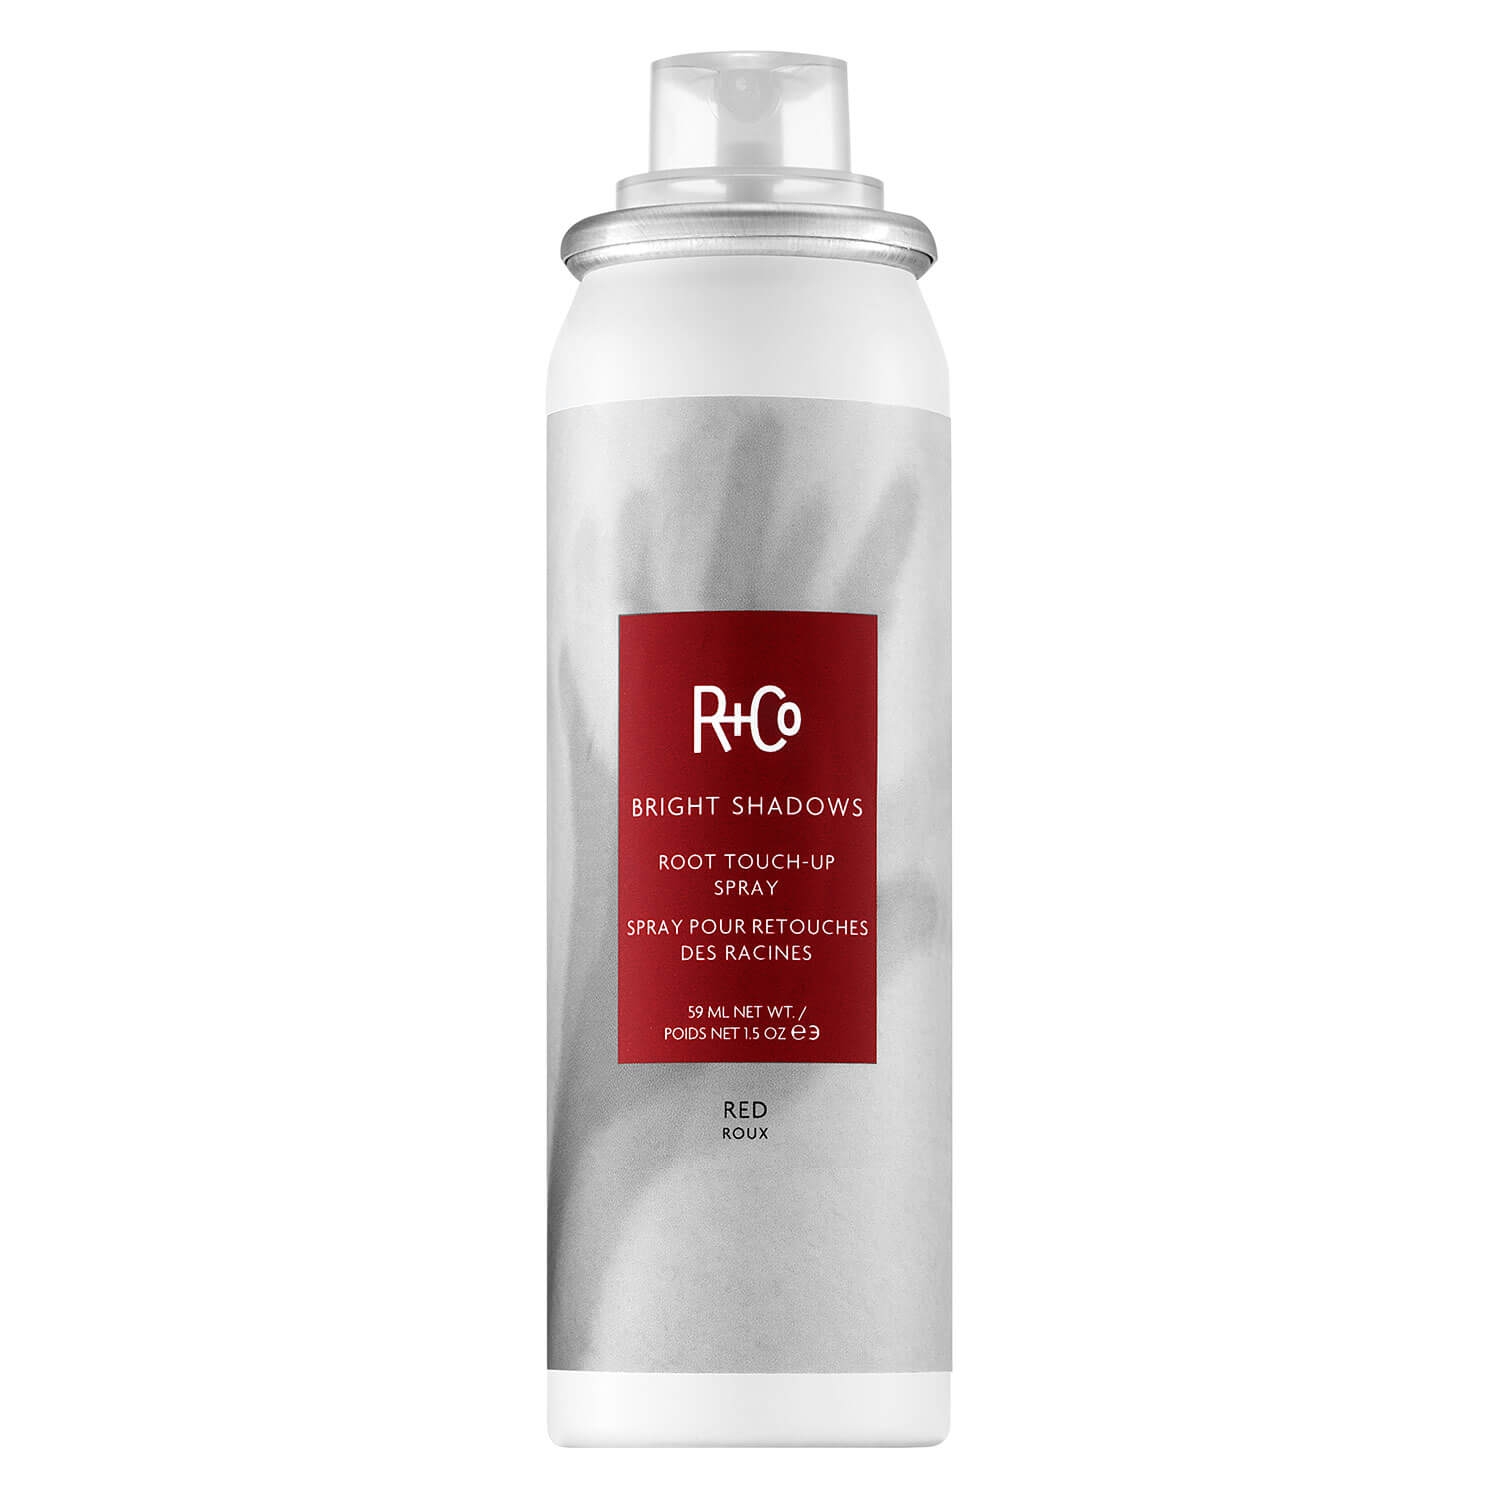 Product image from R+Co - Bright Shadows Root Touch-Up Spray Red